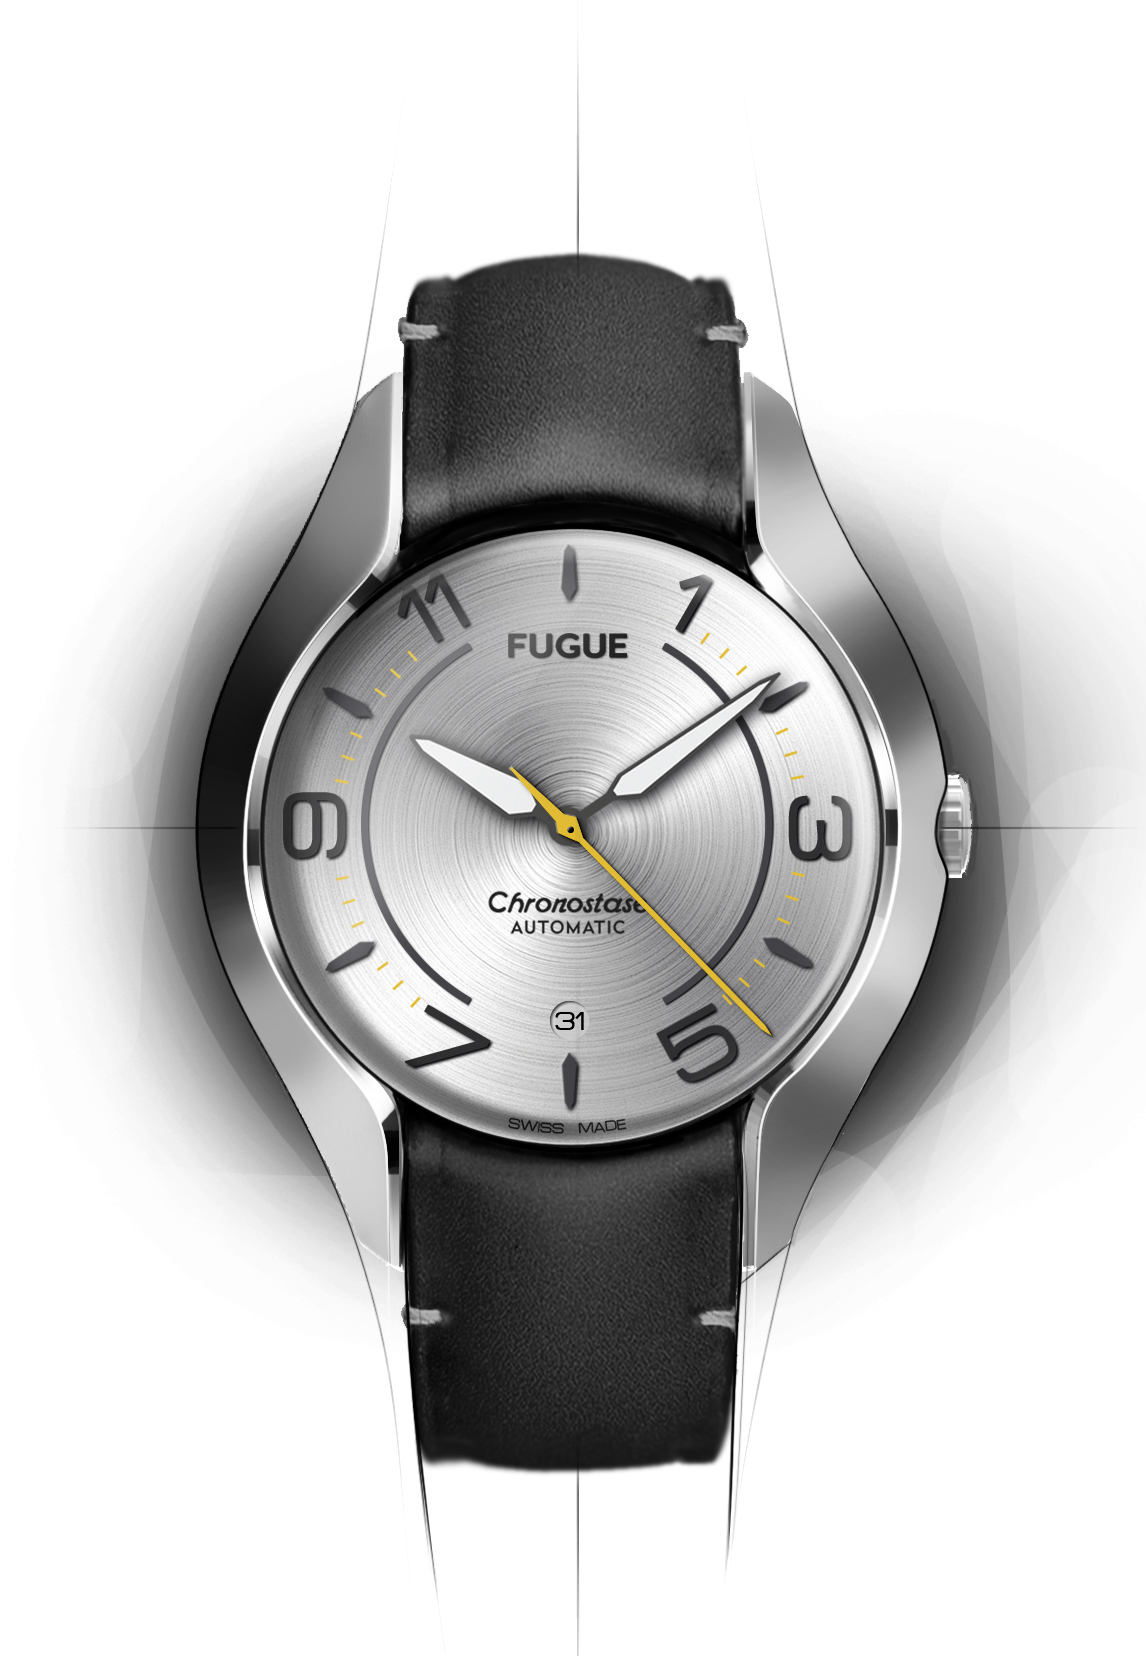 watch Watches fugue time wristwatch montres Freelance detais horology Style